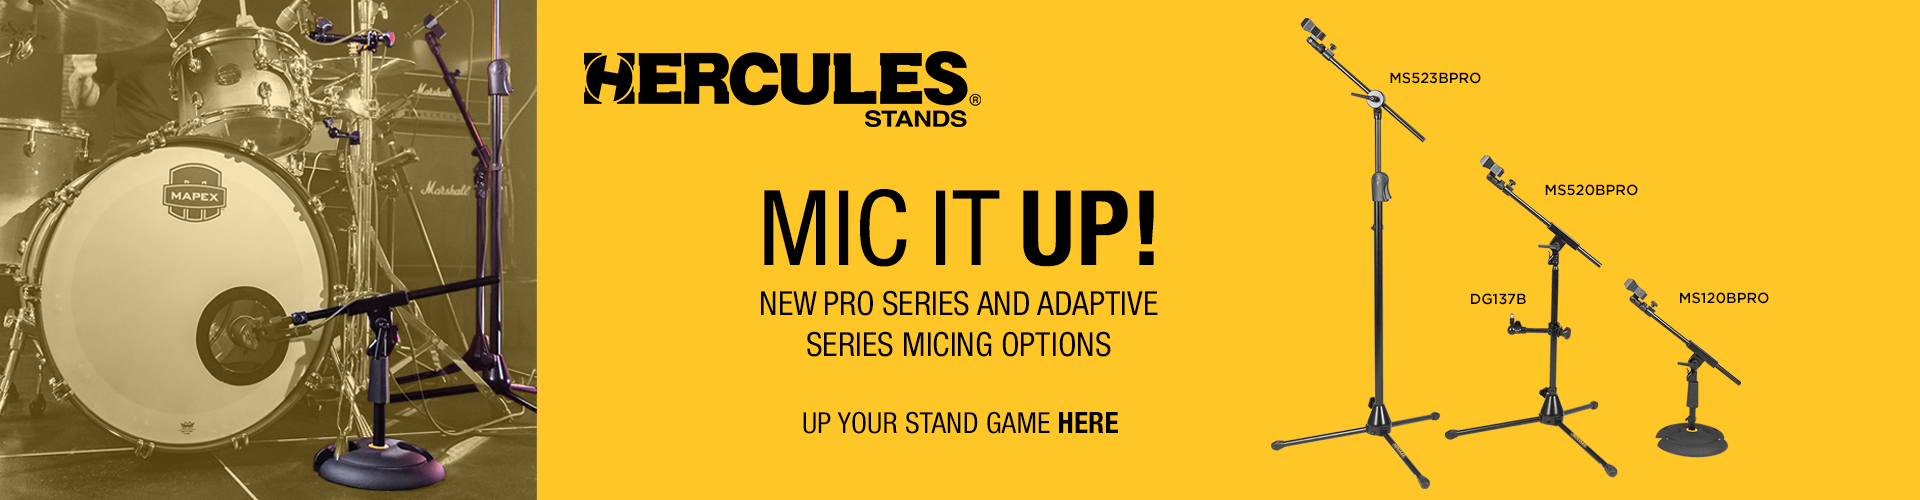 Pro Series Mic Stands